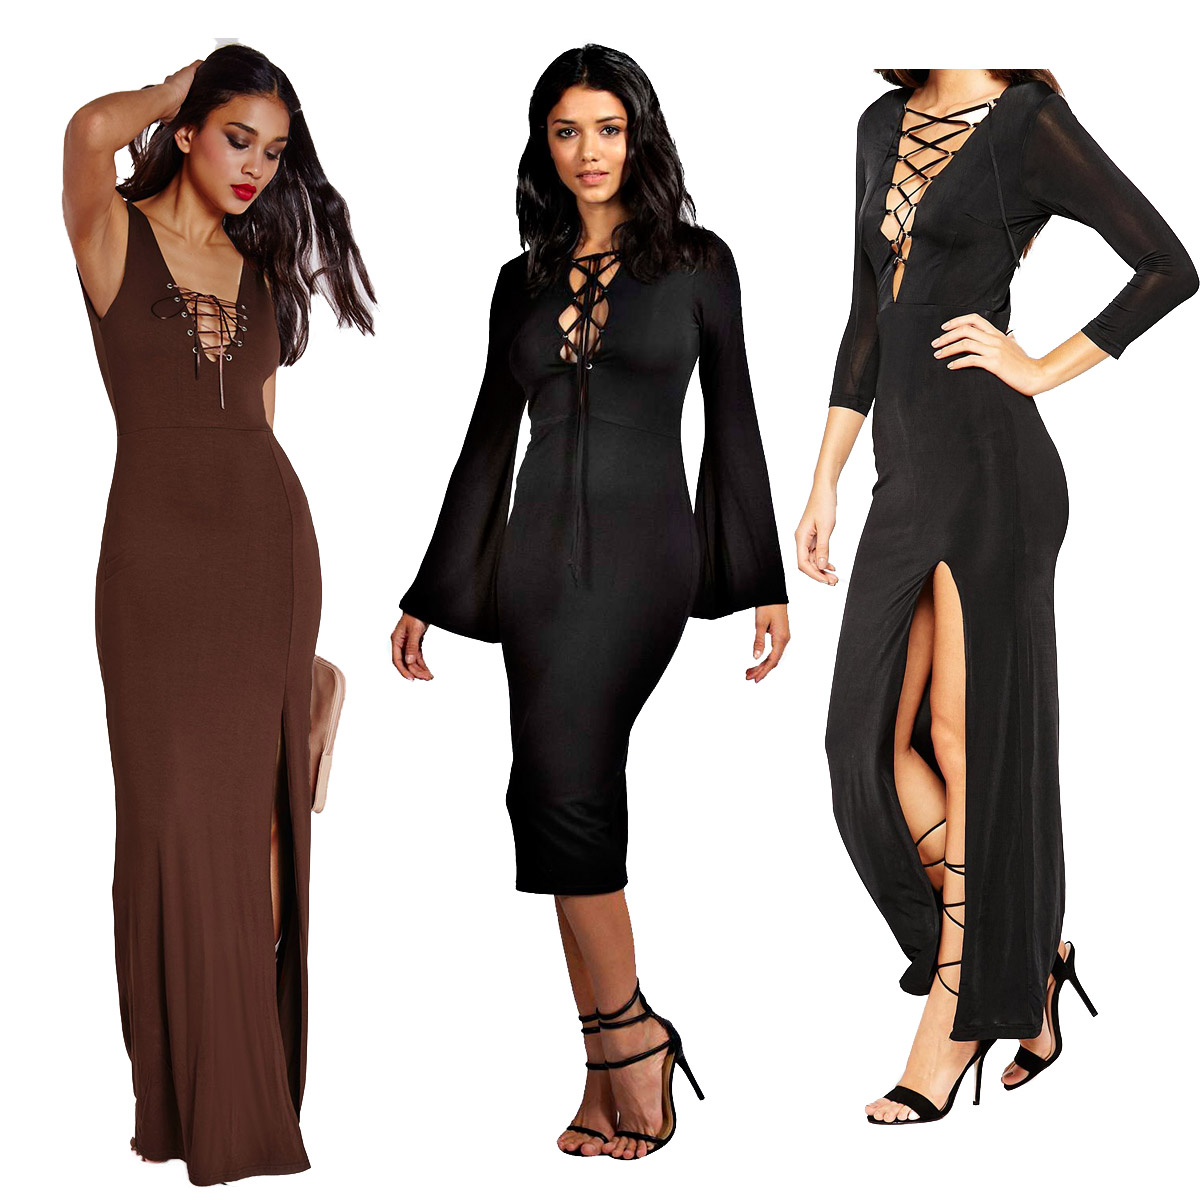 lace-up front bodycon dresses